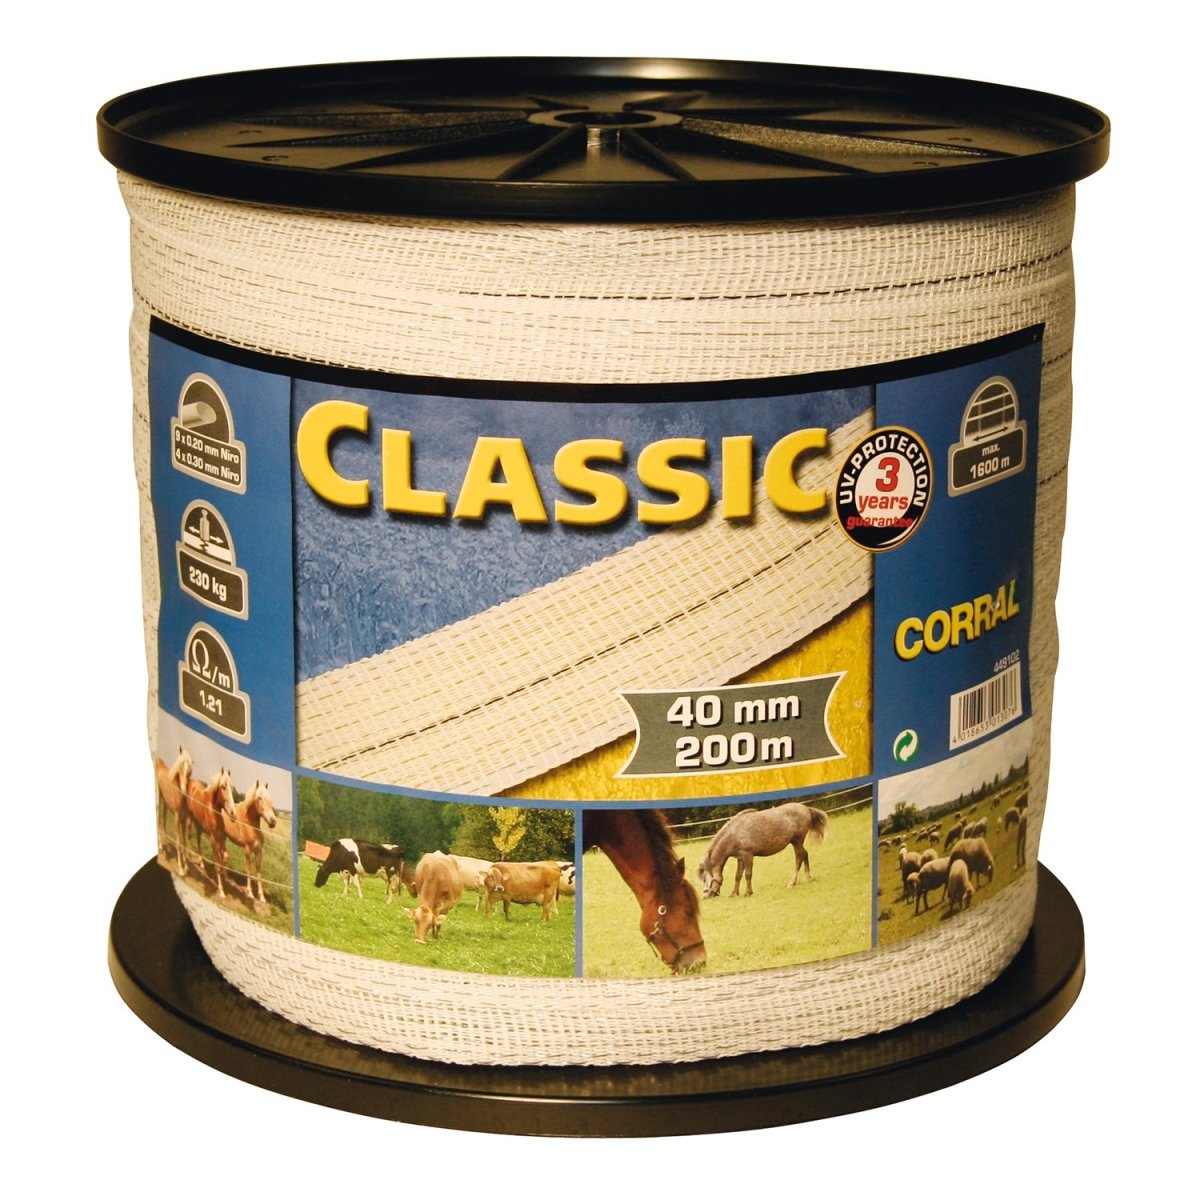 Corral Classic Fencing Tape - 200MX40Mm -